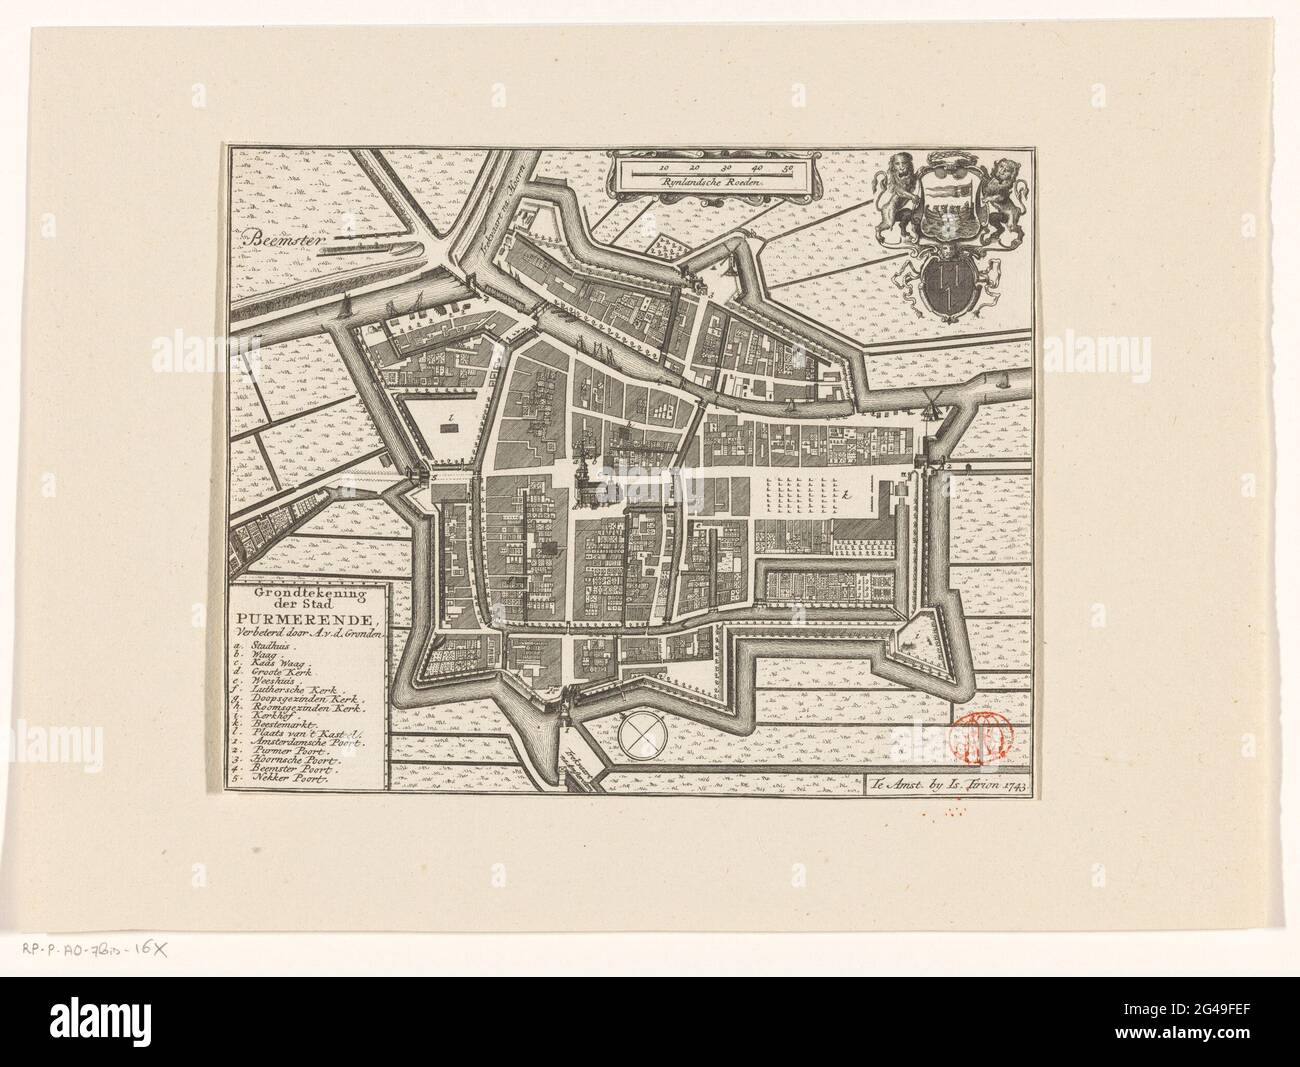 Map of Purmerend; Ground drawing of the city Purmering. Floor plan in At the bottom left of the title the legend. At the top the a crankcase: Rynland